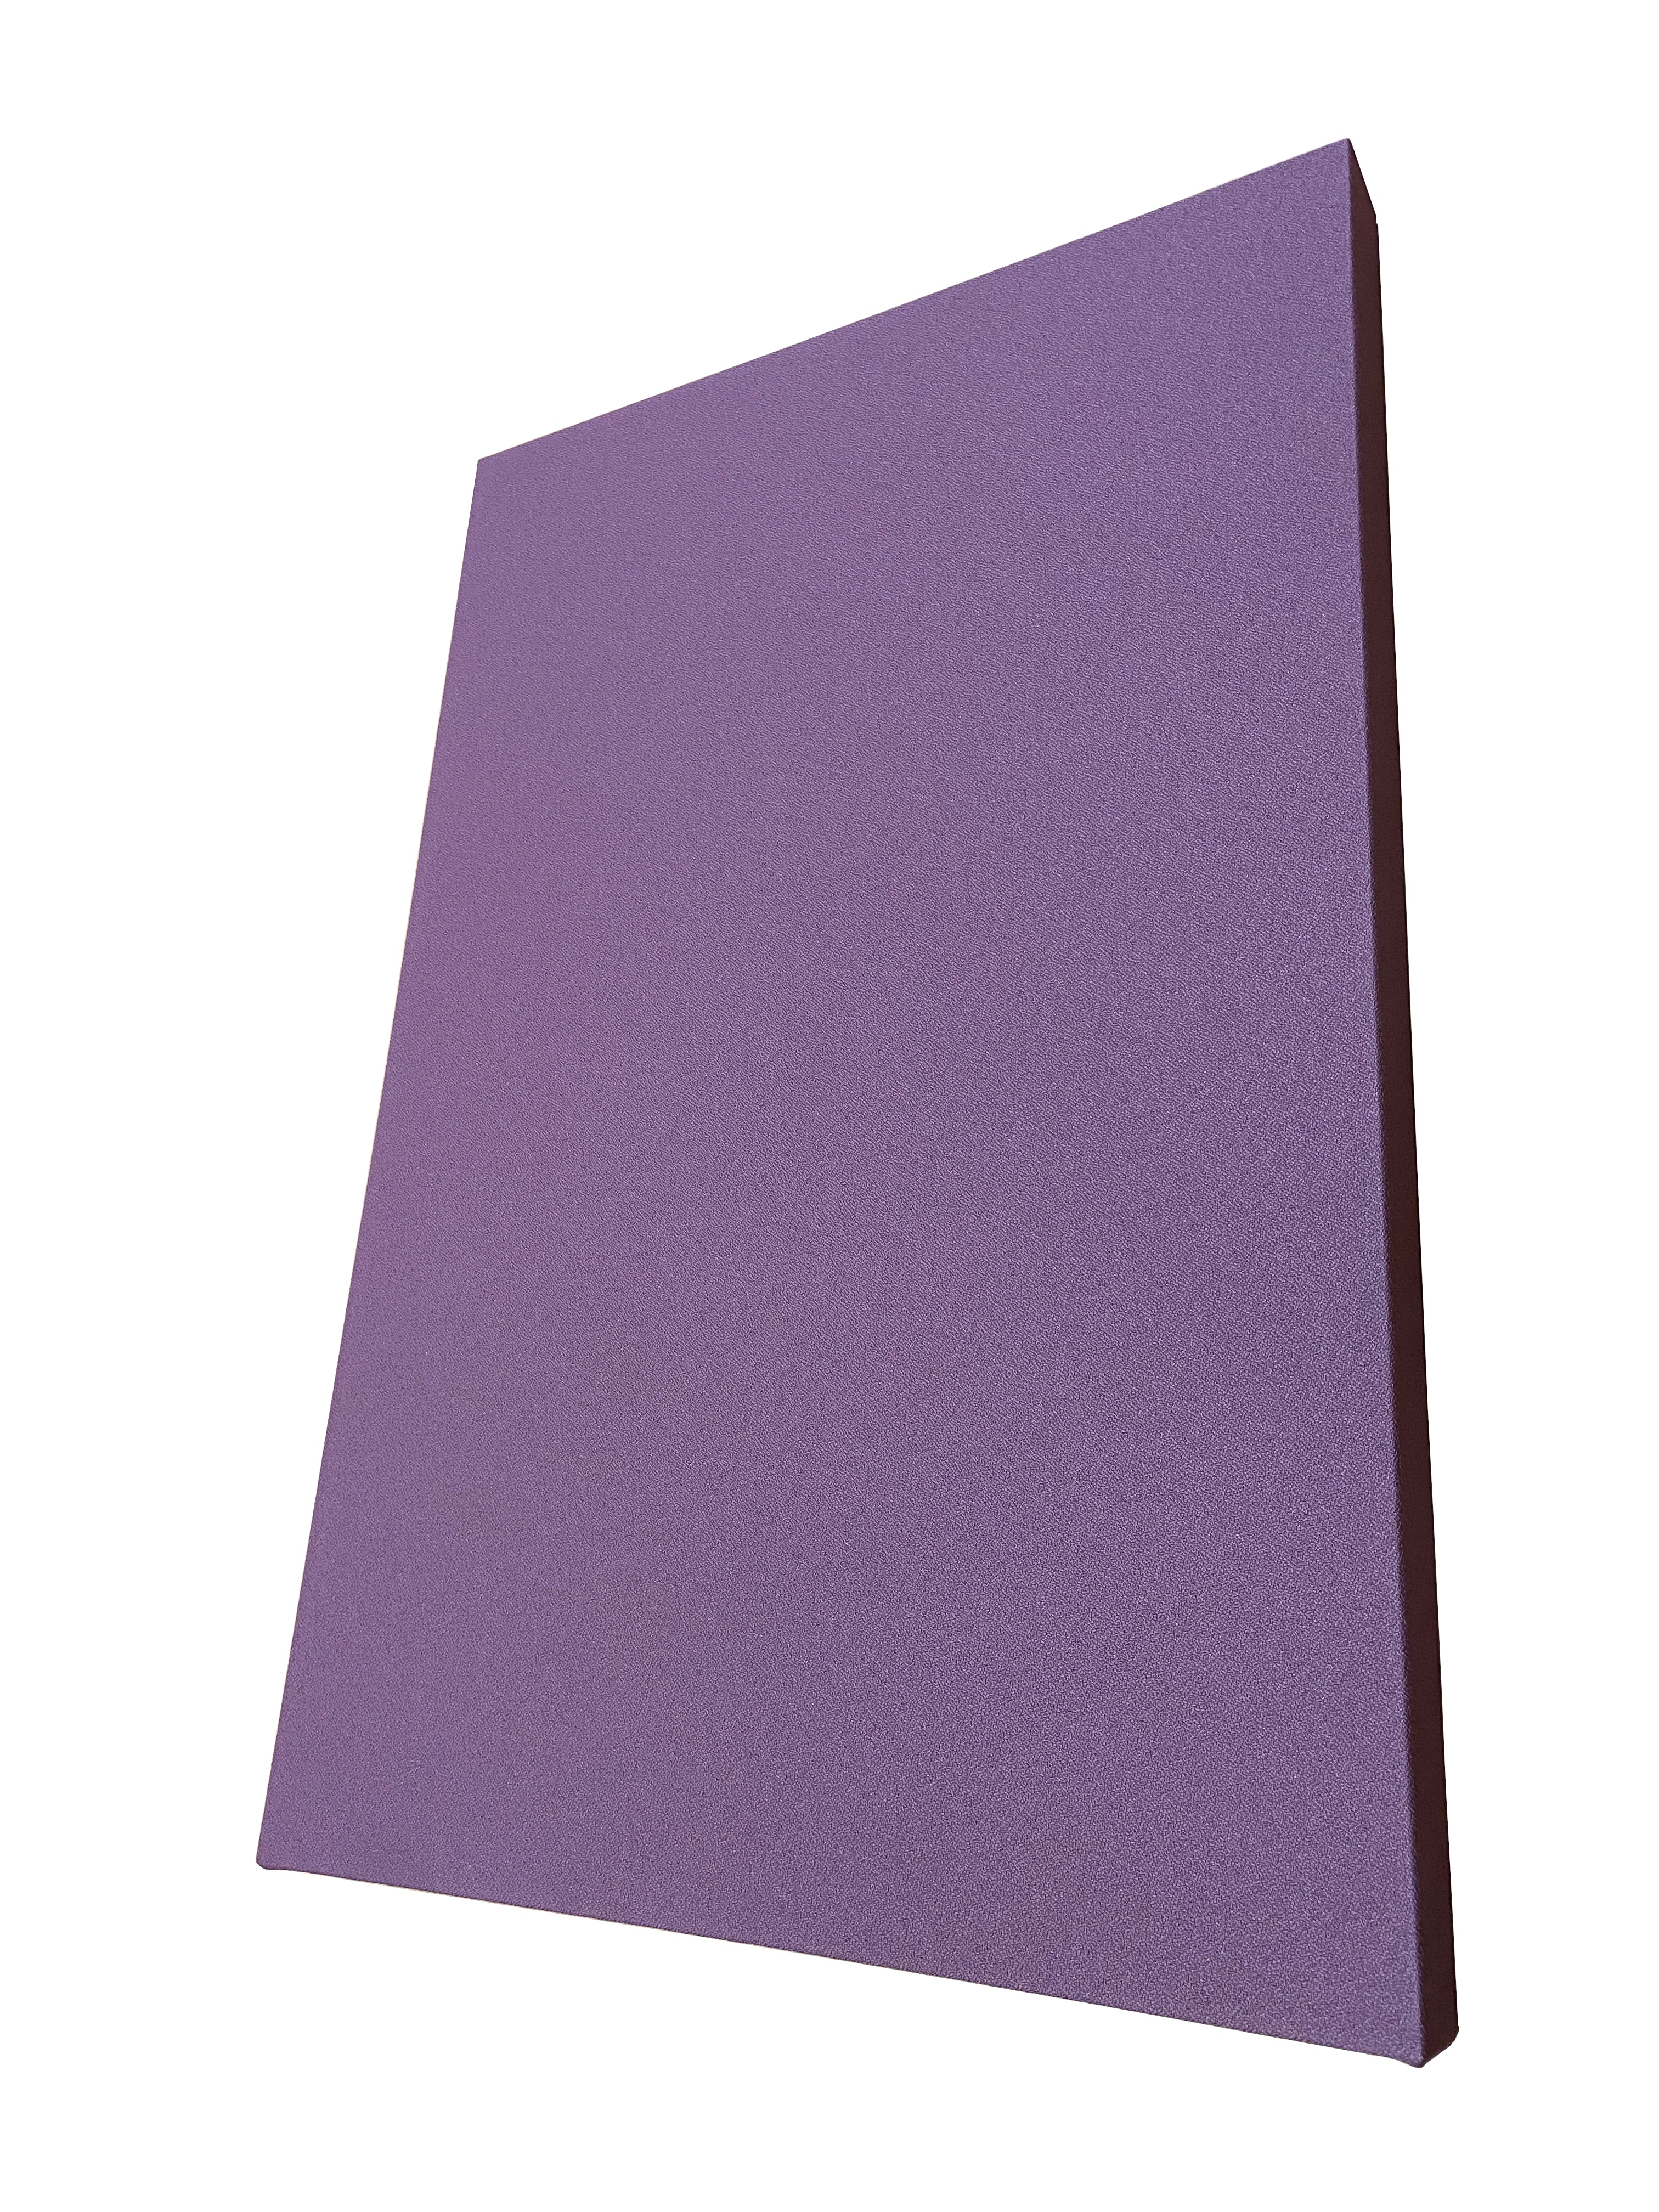 2" SoundControl Ceiling Mounted Acoustic Panel 2ft by 3ft